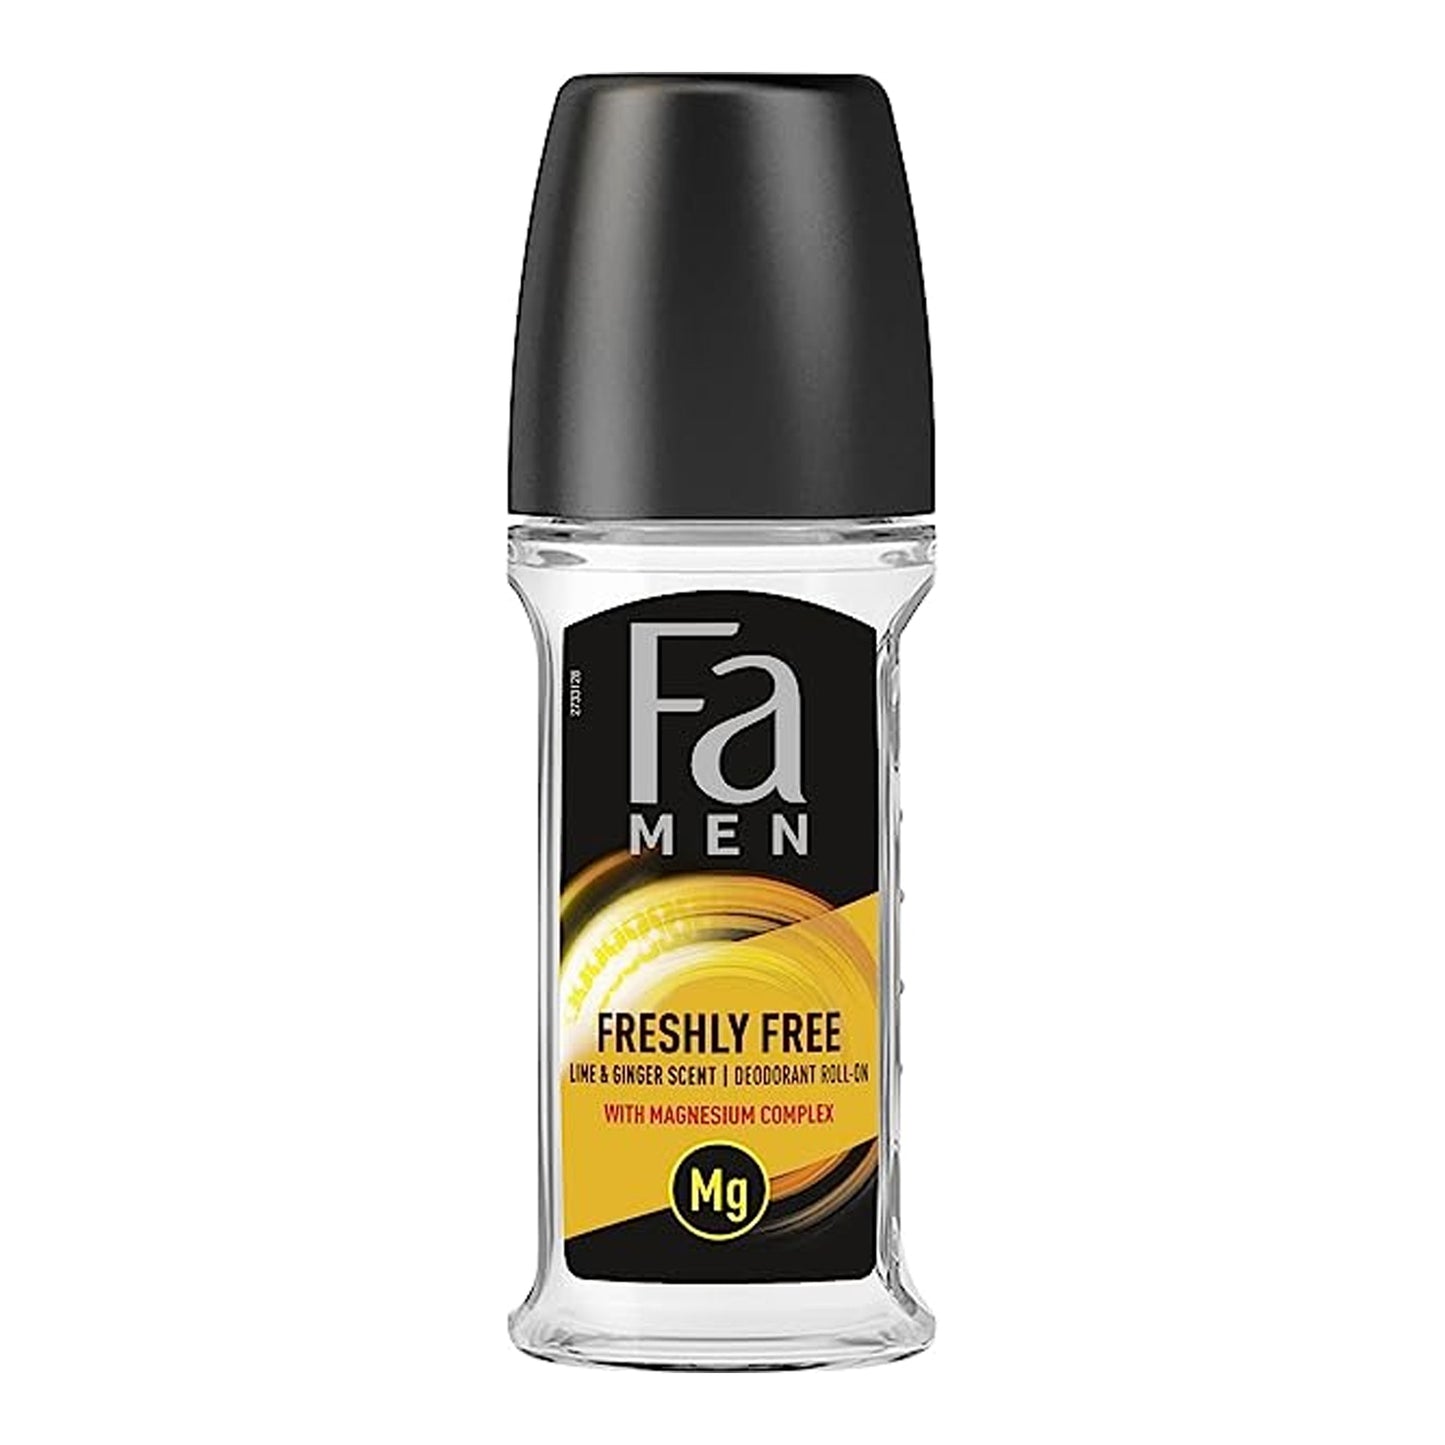 FA MEN - FRESHLY FREE LIME & GINGER SCENT ANTI-PERSPIRANT DEODORANT ROLL ON WITH MAGNESIUM COMPLEX - 50ML